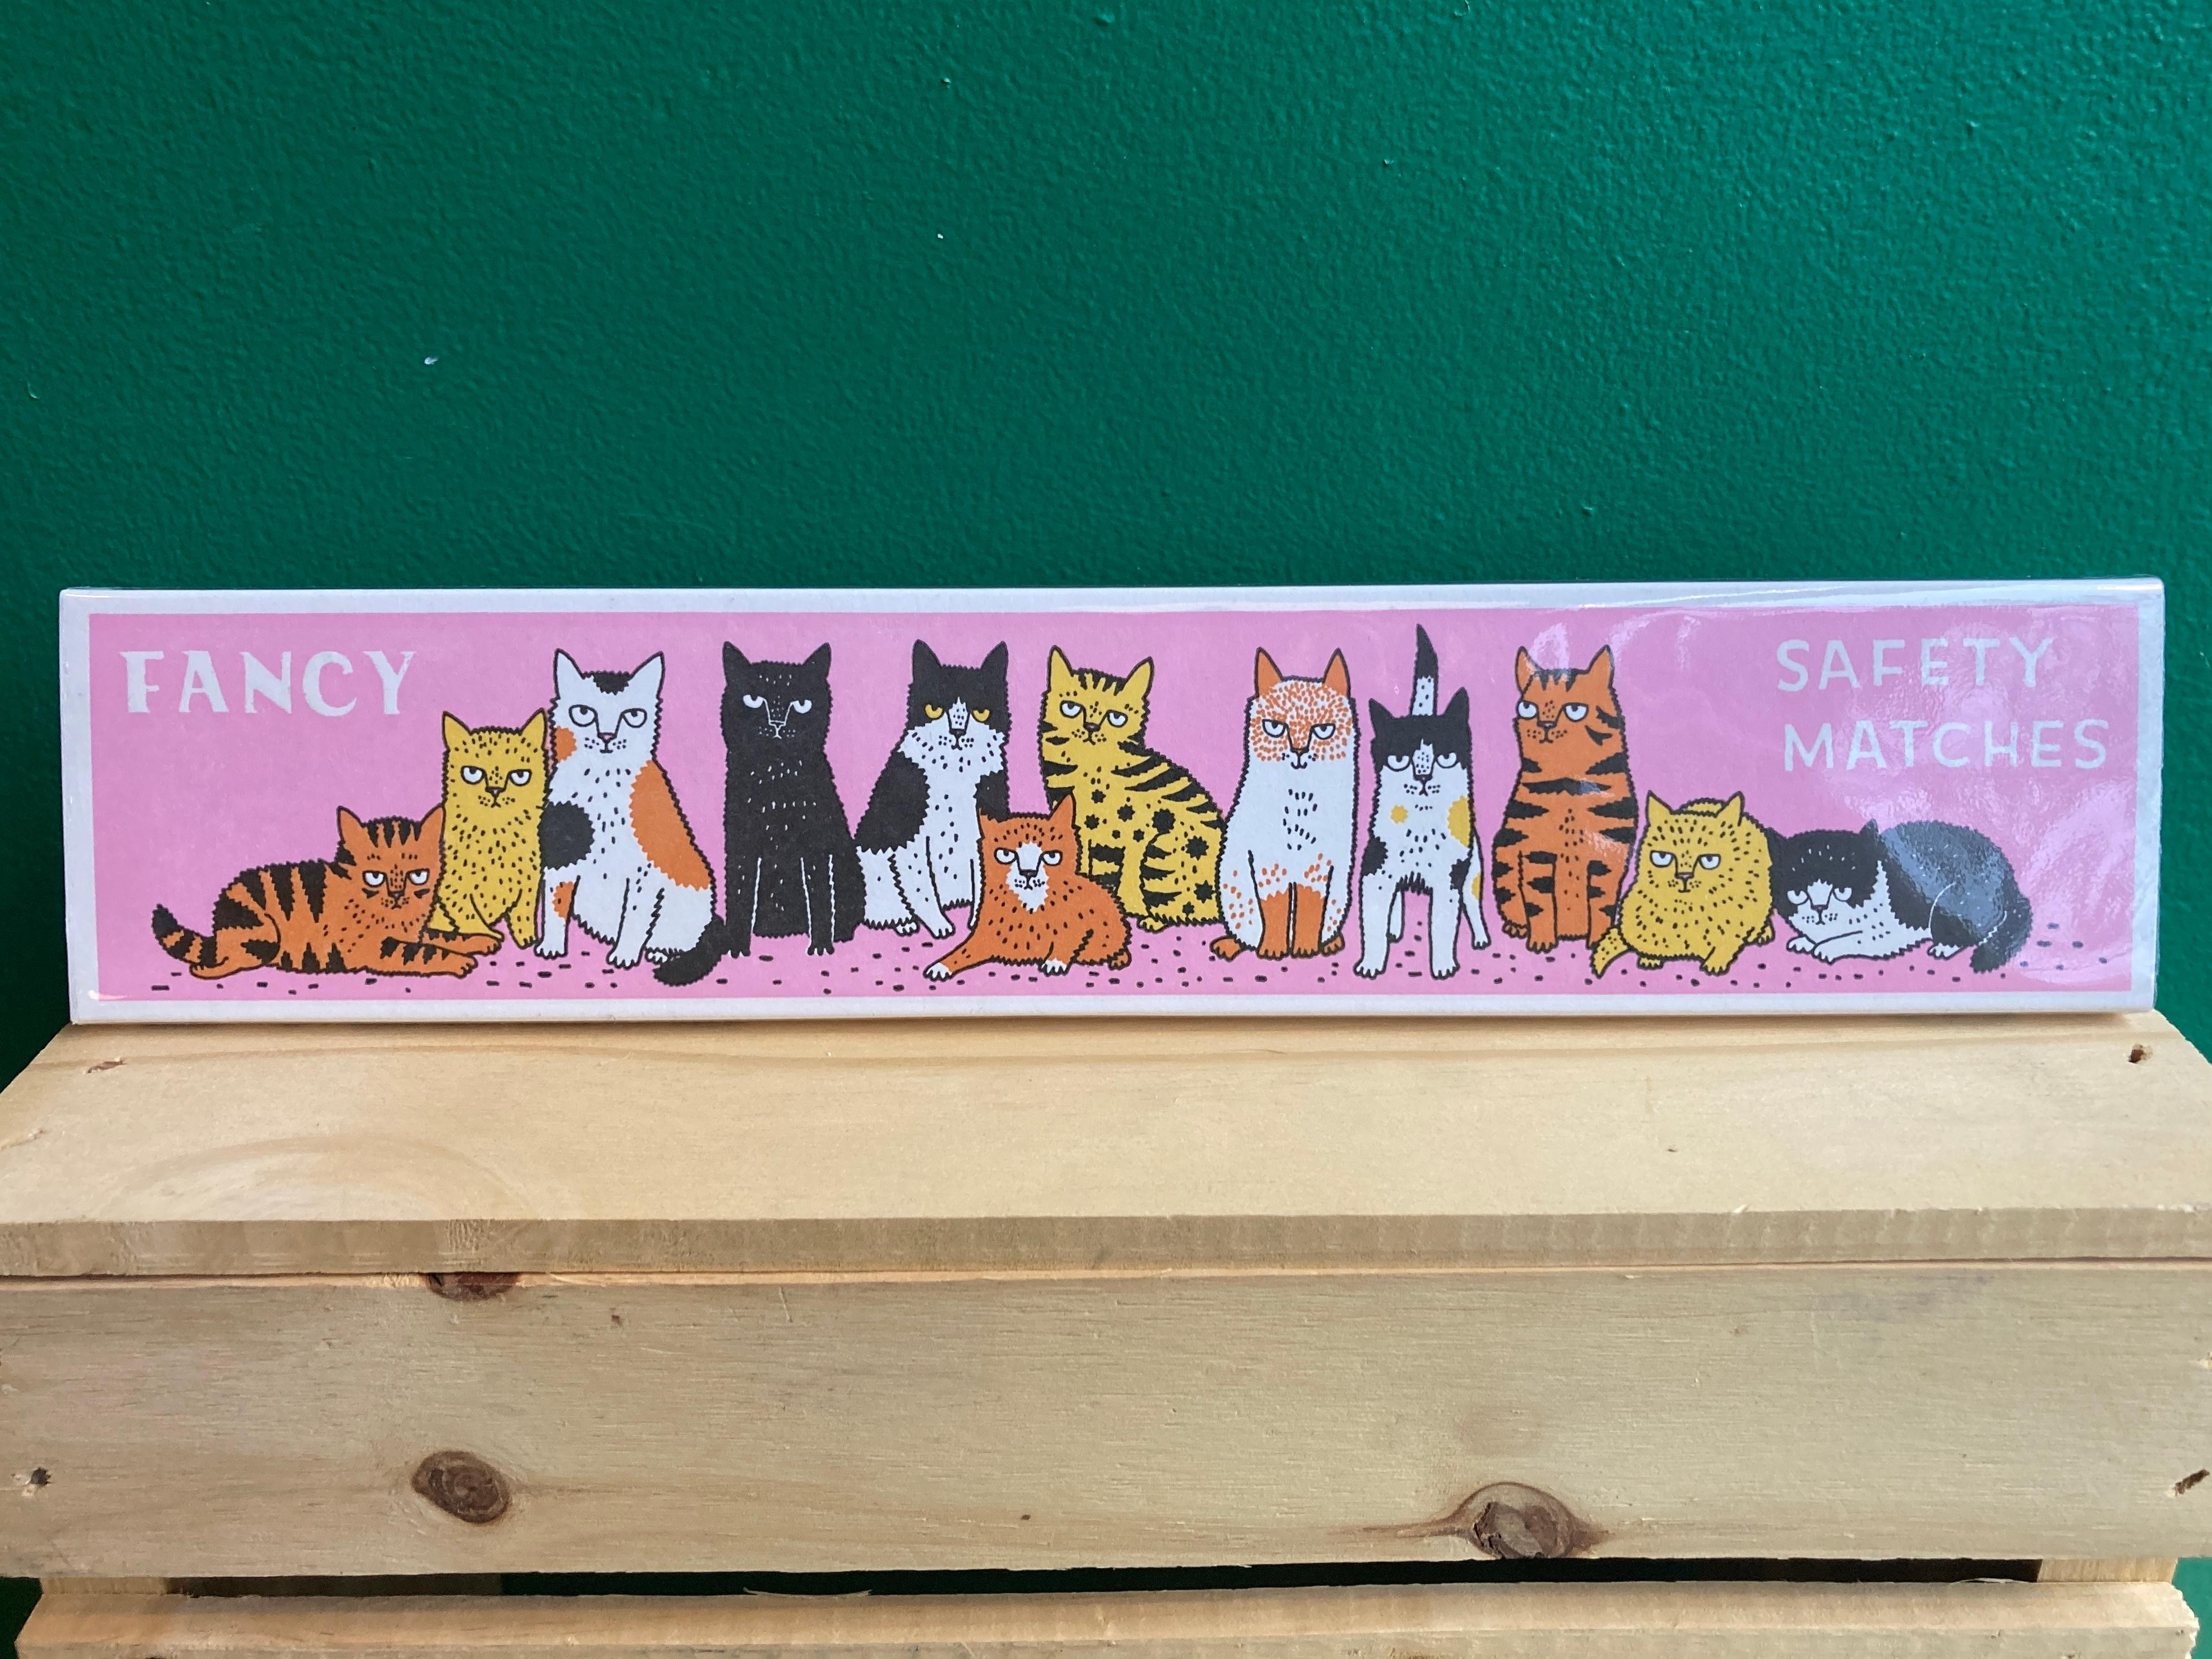 Archivist Gallery - Fancy Cat Safety Matches